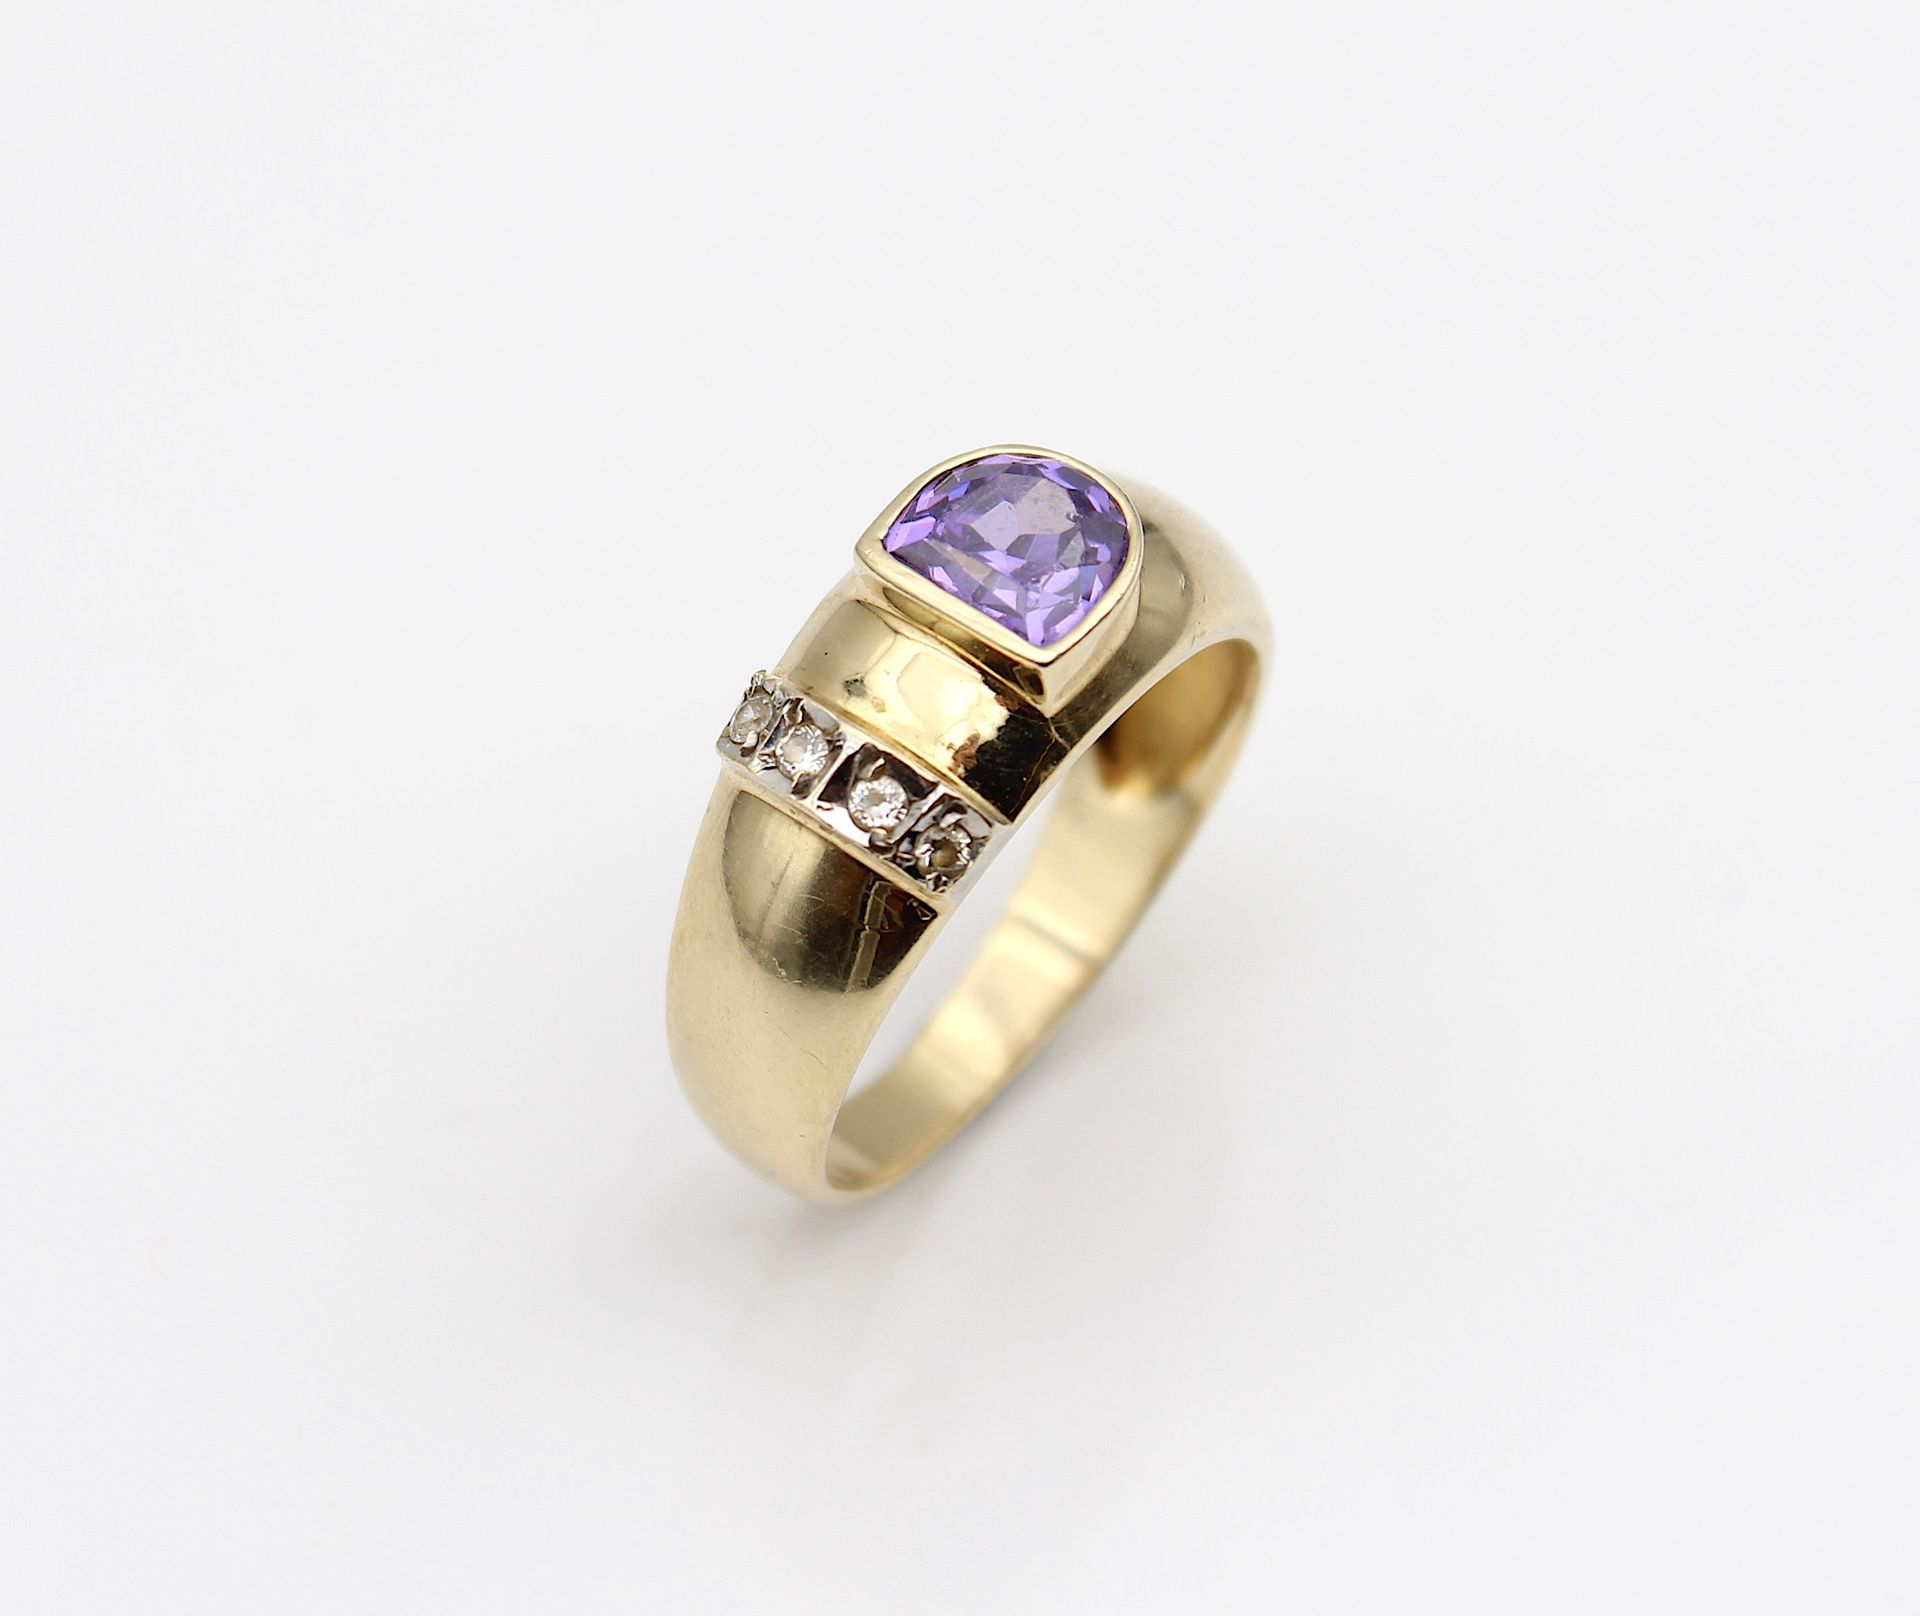 Decorative ring with colored cubic zirconia - Image 2 of 4